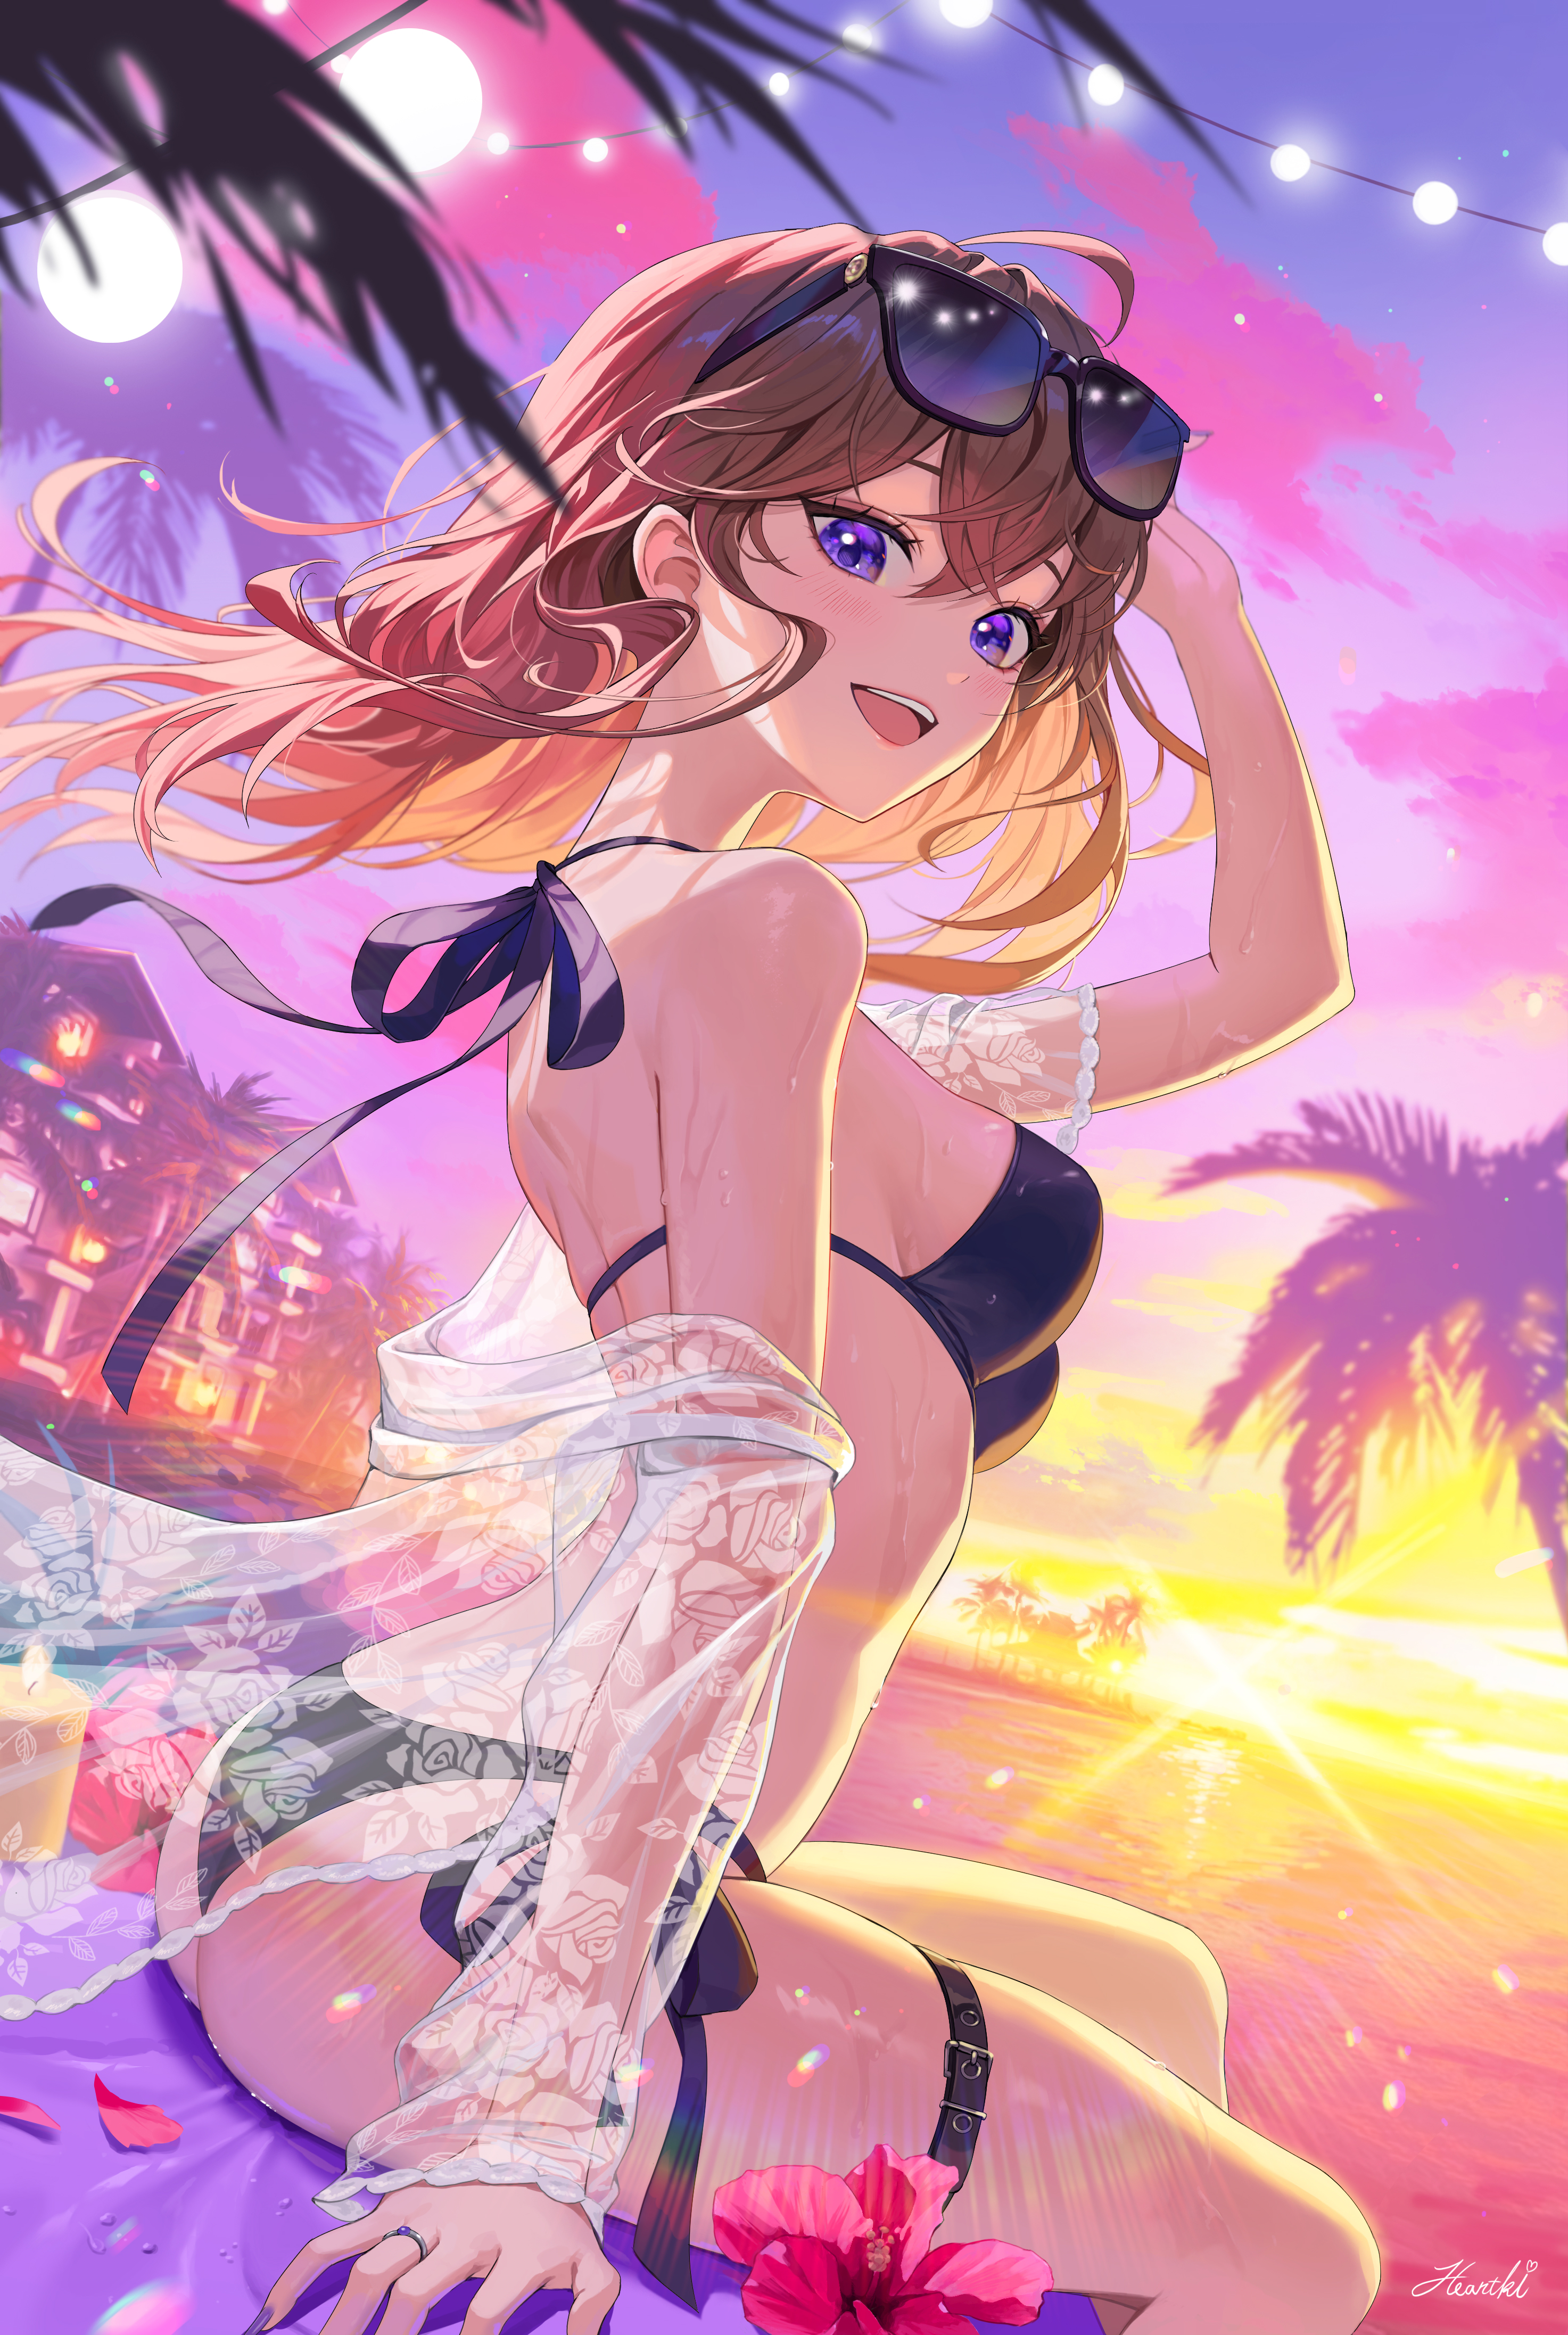 Anime 2946x4387 anime girls portrait display sunset sunset glow swimwear black bikinis looking sideways flowers hibiscus looking at viewer palm trees wet swimsuit sky see-through clothing smiling purple eyes signature lens flare hair blowing in the wind wet body windy brunette lights candles sunglasses ahoge Heartki clouds outdoors women outdoors seashore thigh strap pink flowers petals house thighs sideboob wet Sun ass boobs